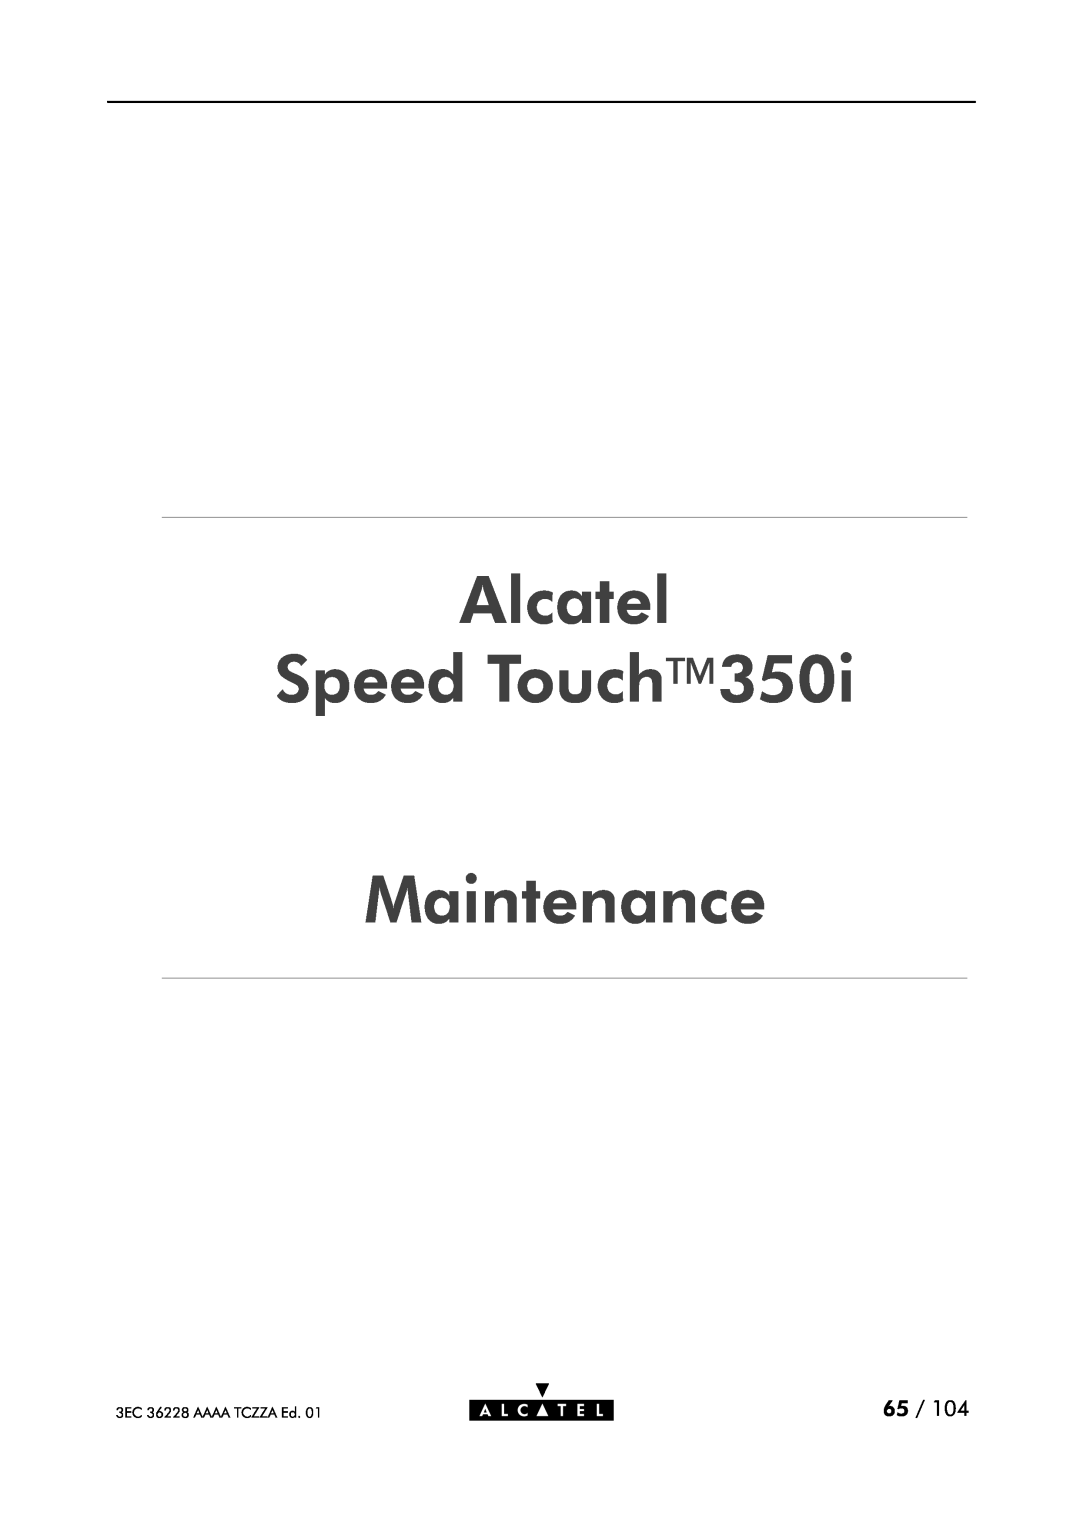 Alcatel Carrier Internetworking Solutions 350I manual Alcatel Speed Touch Maintenance, 3EC 36228 AAAA TCZZA Ed 